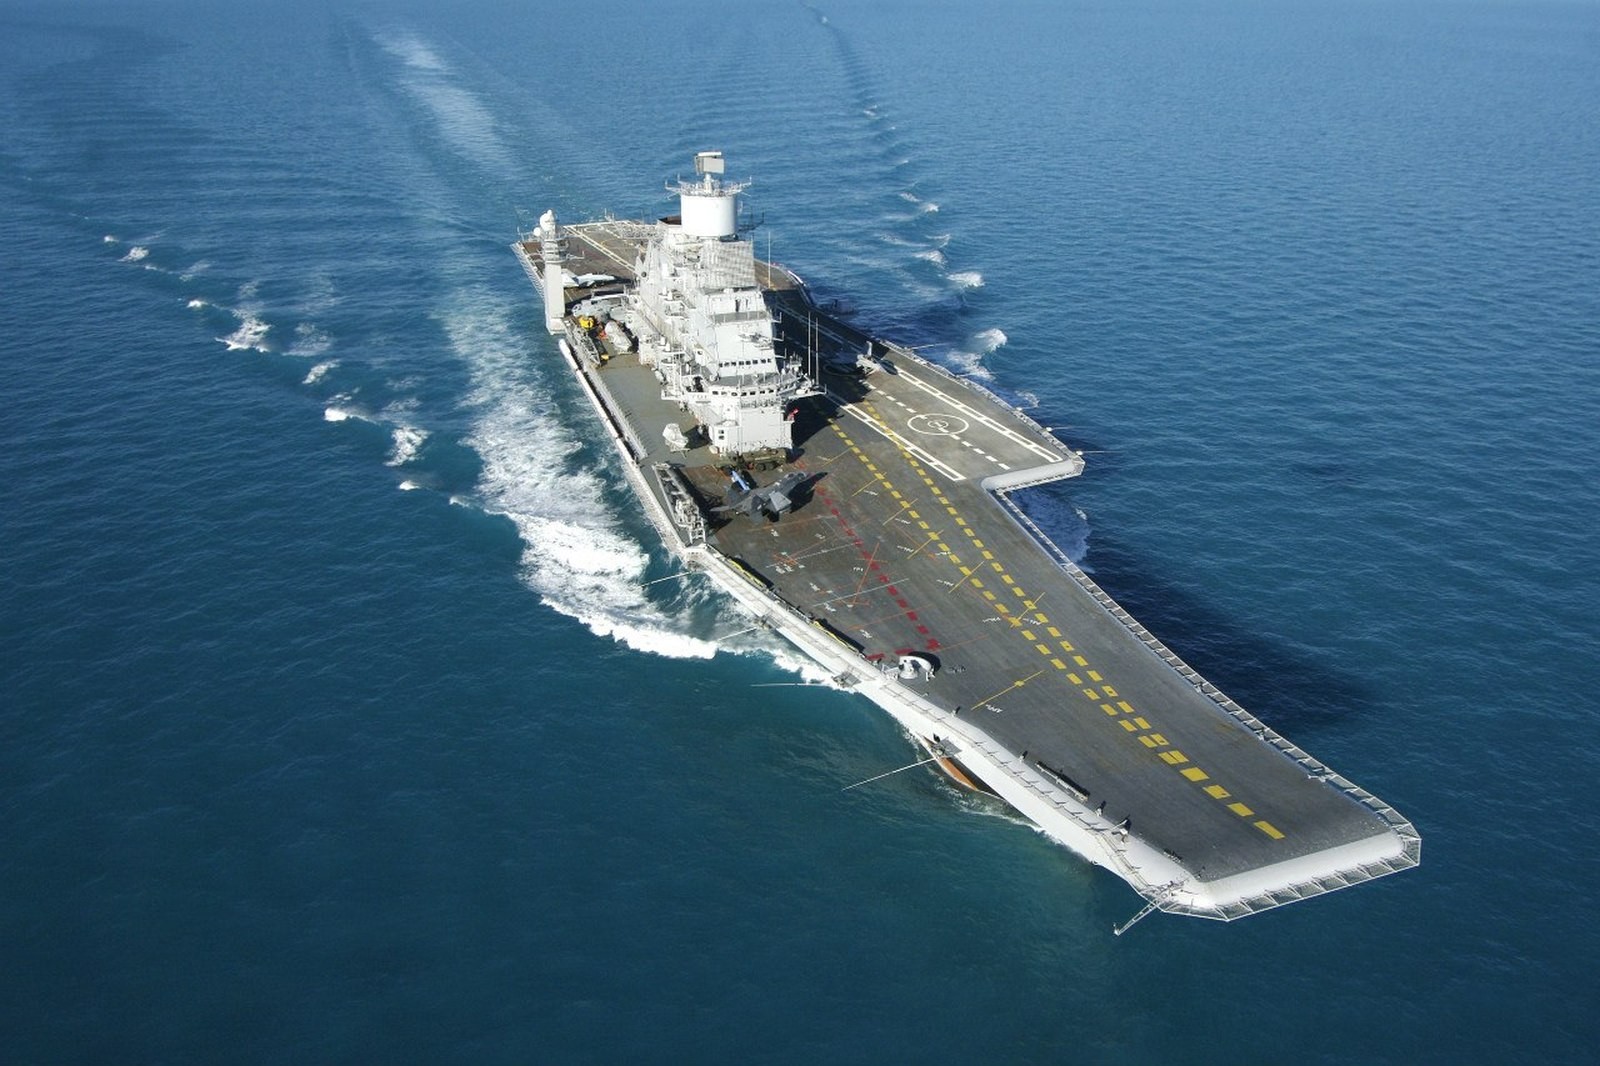 aircraft carrier ins vikramaditya Wallpaper HD / Desktop and Mobile Background